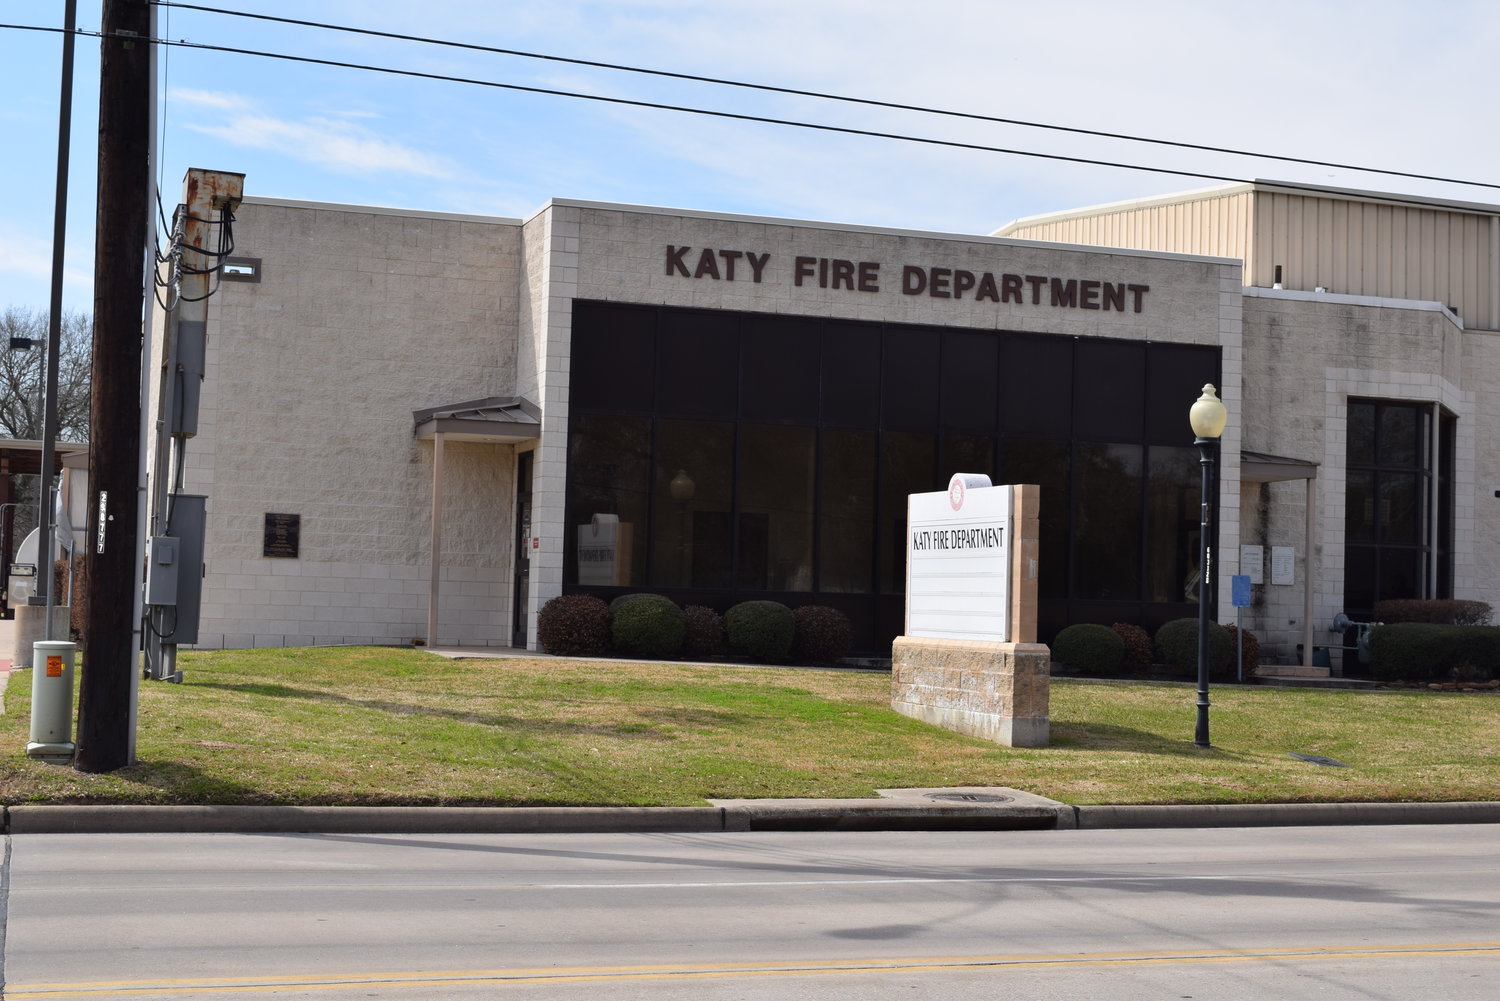 Repairs are underway at Katy’s Fire Station One on Avenue D in downtown Katy. Most of the repairs are centered around the south portion of the building, shown here, which has water damage and mold issues as a result of poor initial construction and other issues since the early 1980s.